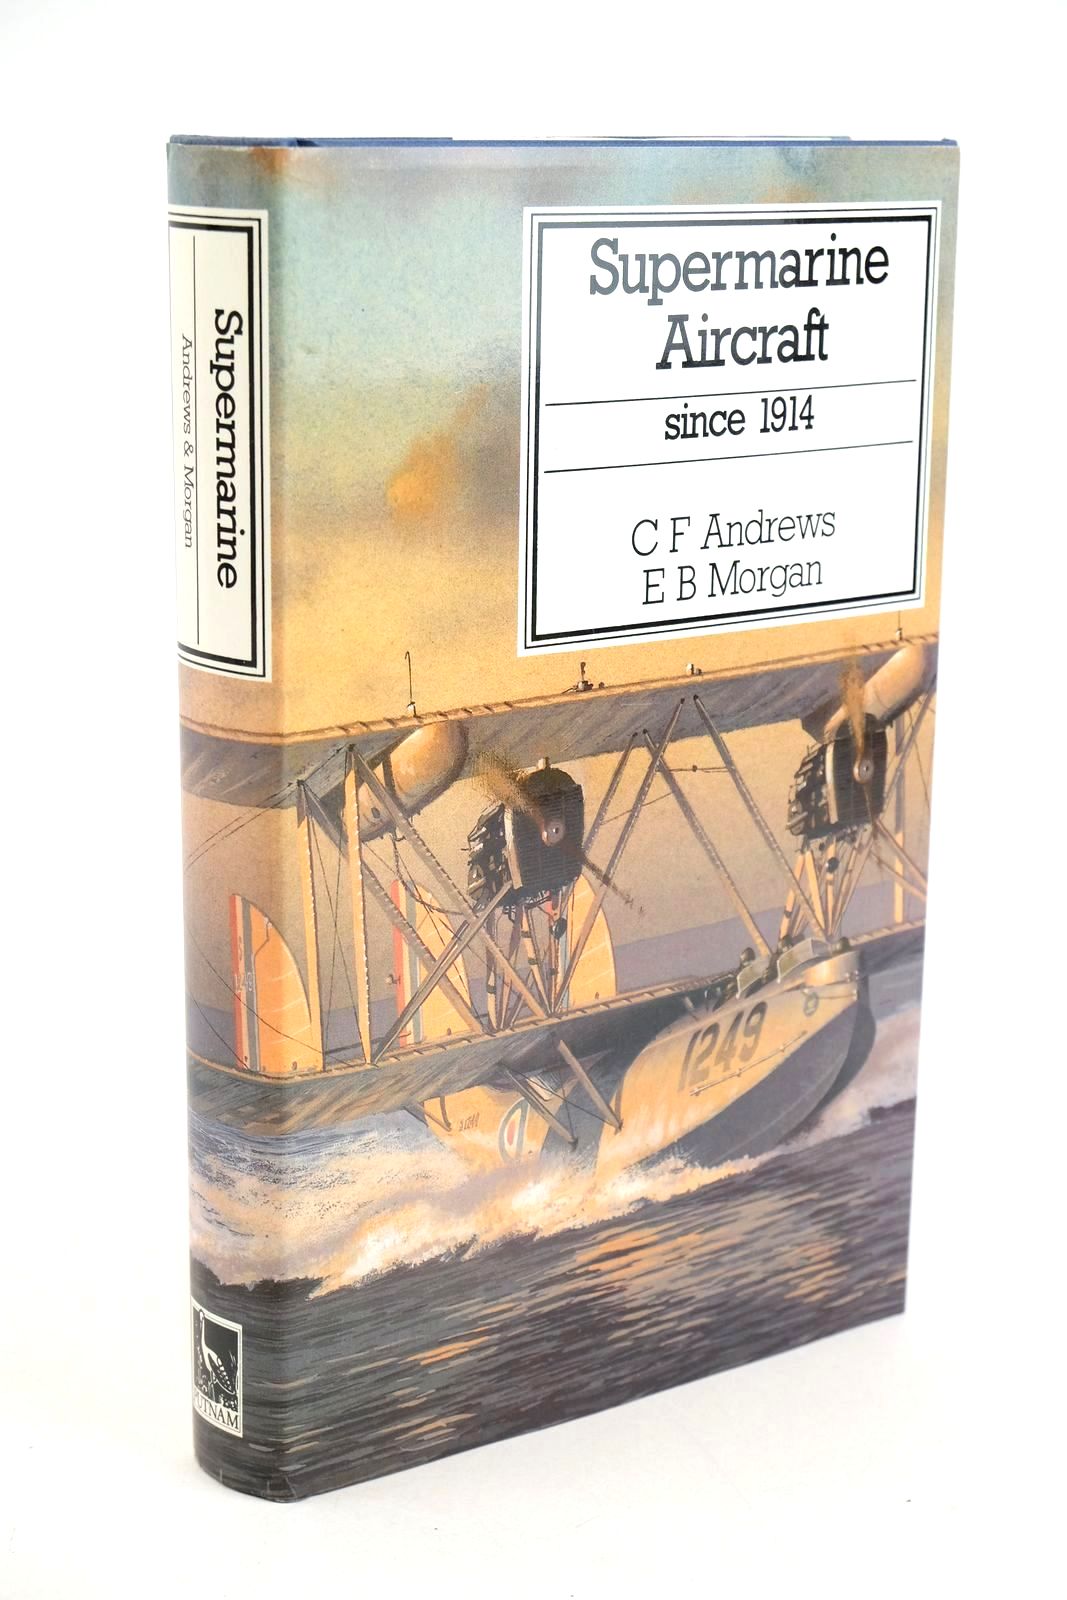 Photo of SUPERMARINE AIRCRAFT SINCE 1914 written by Andrews, C.F. Morgan, E.B. published by Putnam (STOCK CODE: 1327948)  for sale by Stella & Rose's Books